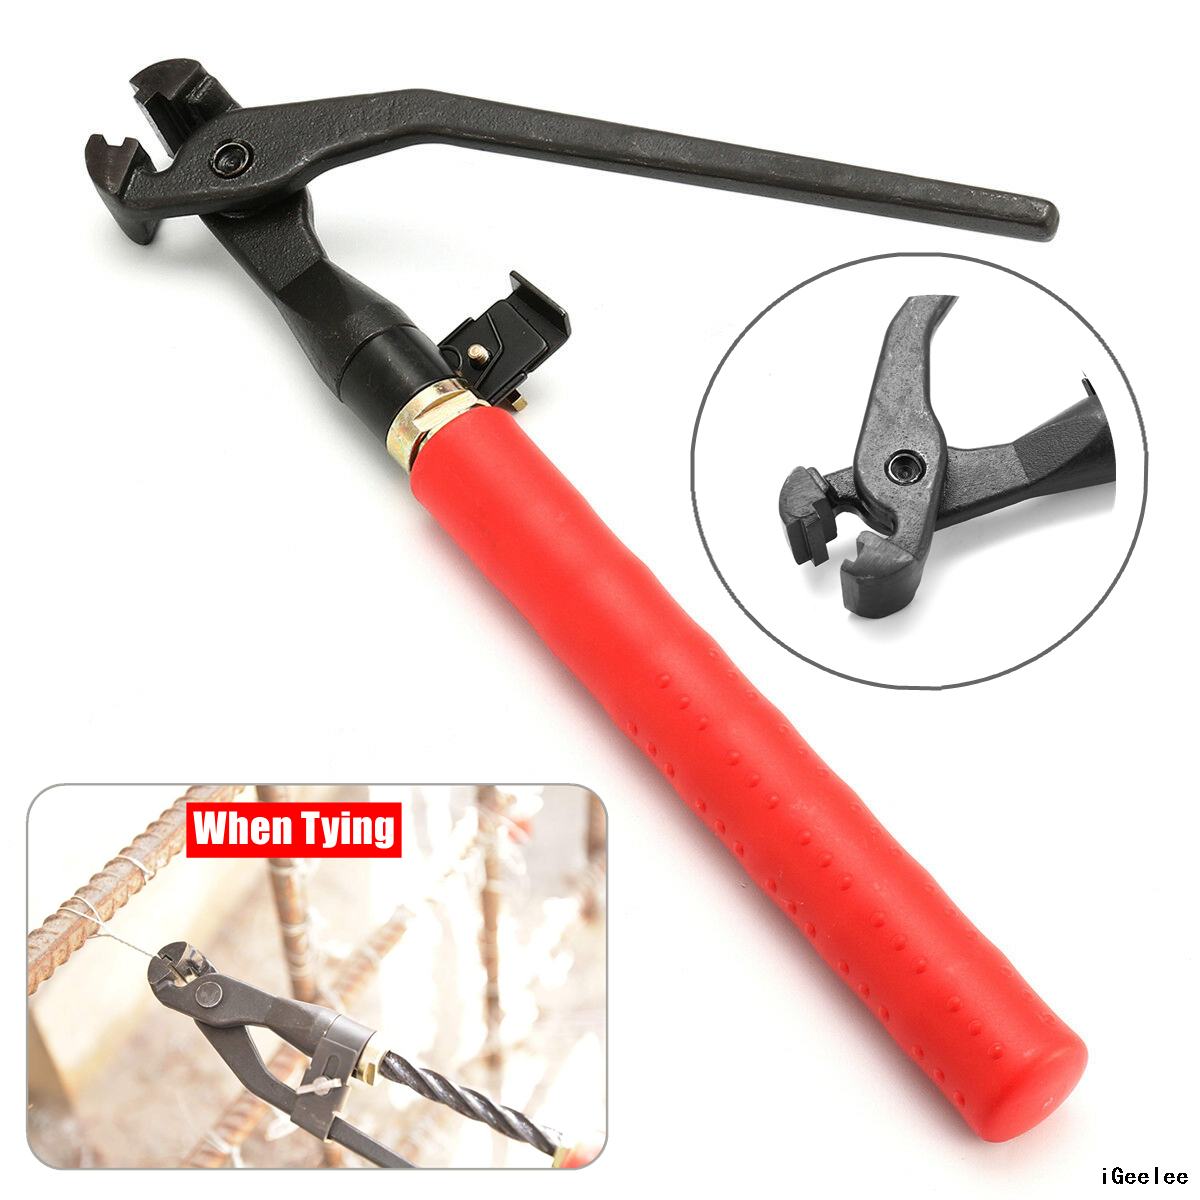 IG-60G Manual Rebar Tying Tool Can Attach with Single,double Or Triple Steel Wires for Φ0.8/1/1.2/1.5mm